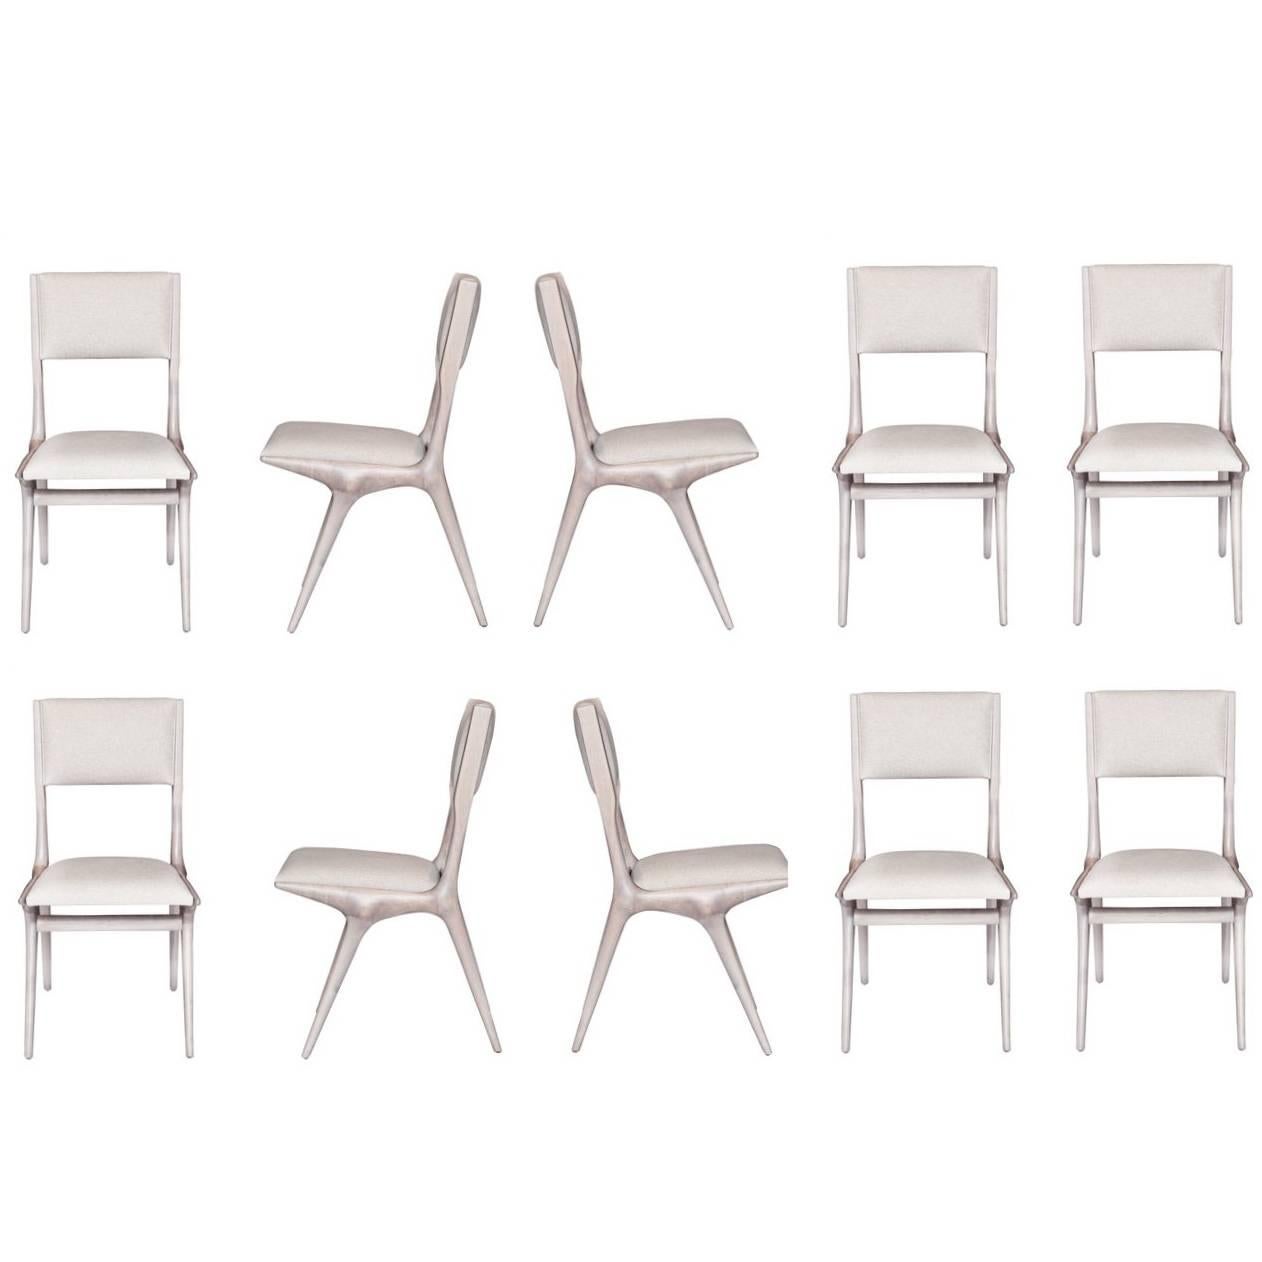 Boone Dining Chairs For Sale